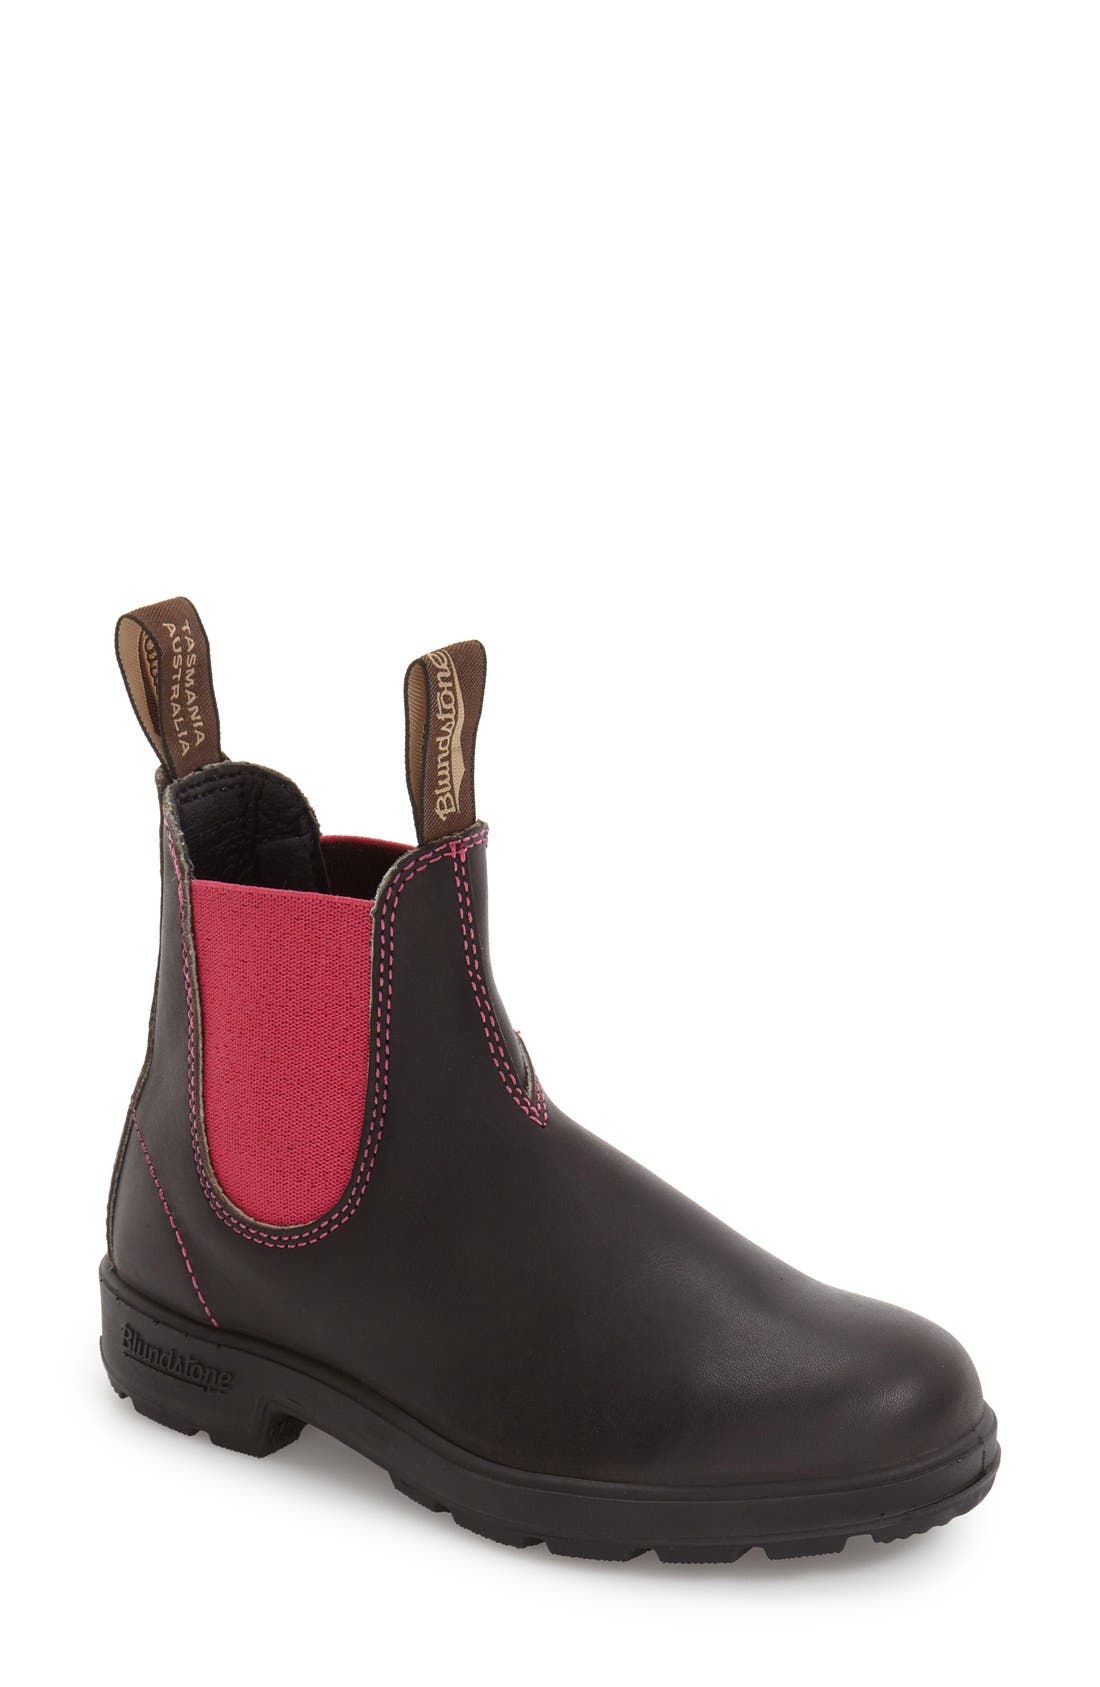 nordstrom blundstone womens boots